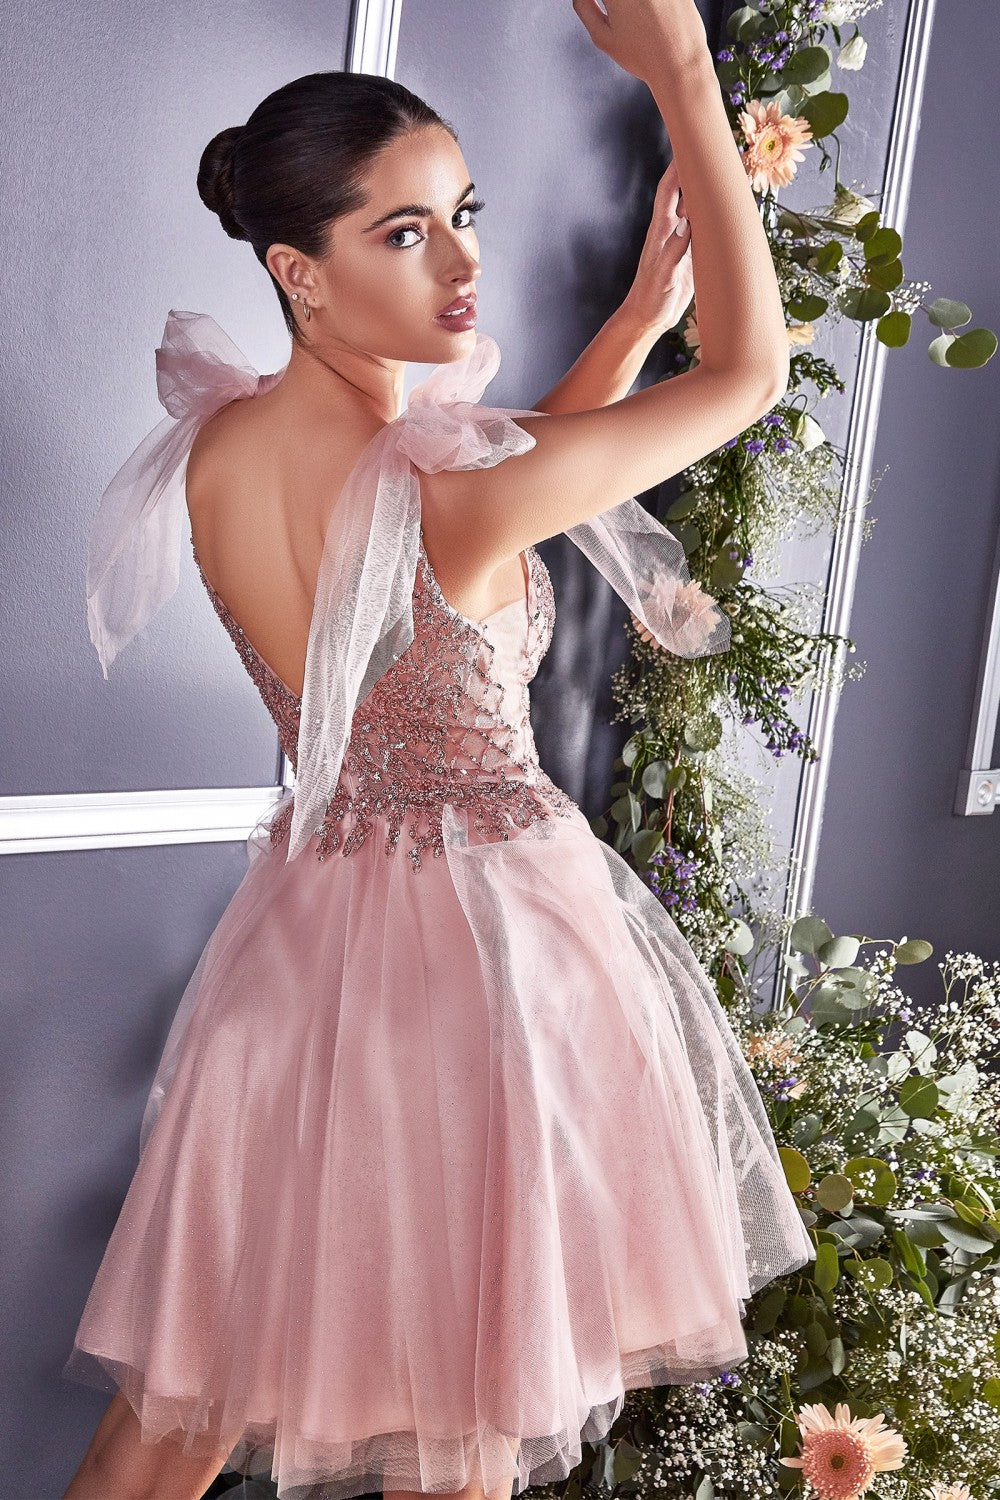 A-Line Mini Cocktail Dress Deep illusion V-neckline Bodice Sequin Embellished Corset Pretty Prom & Bridesmiad Gown CDCD0174 Elsy Style Cocktail Dress